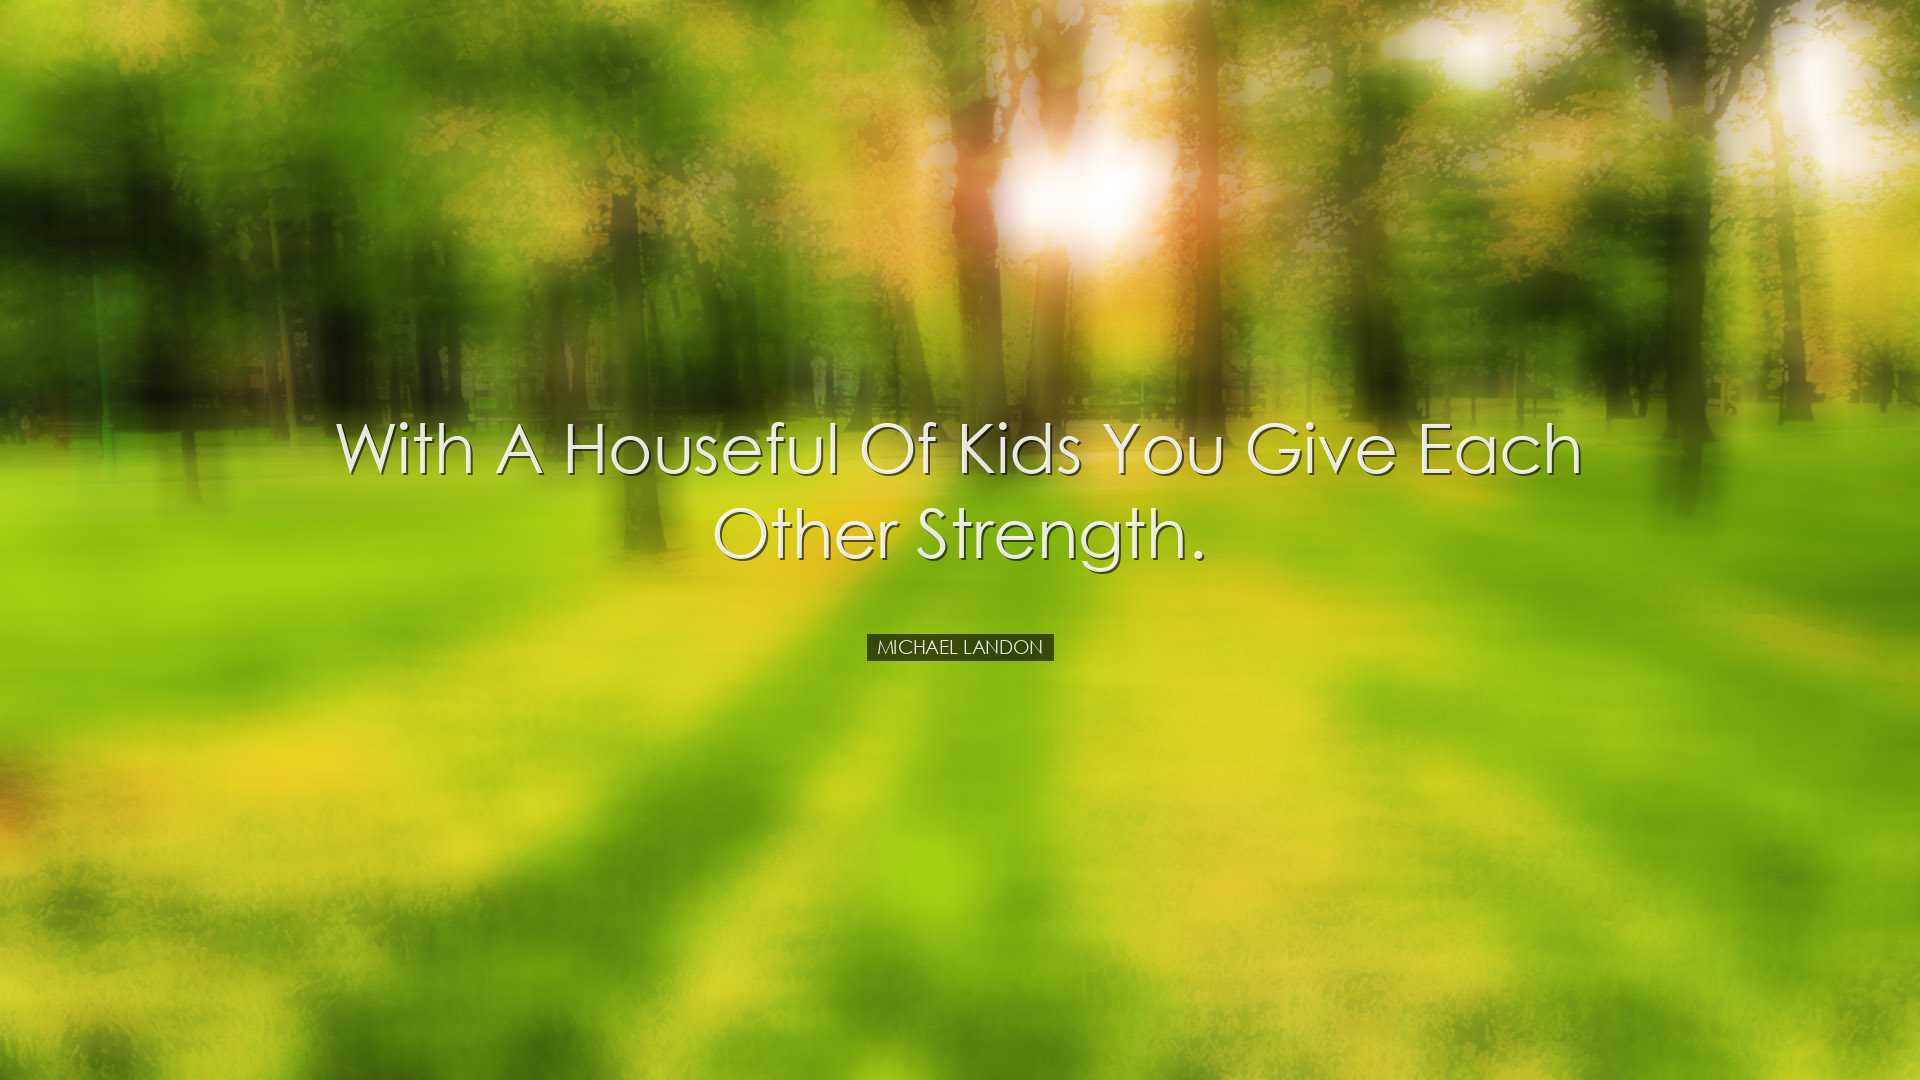 With a houseful of kids you give each other strength. - Michael La